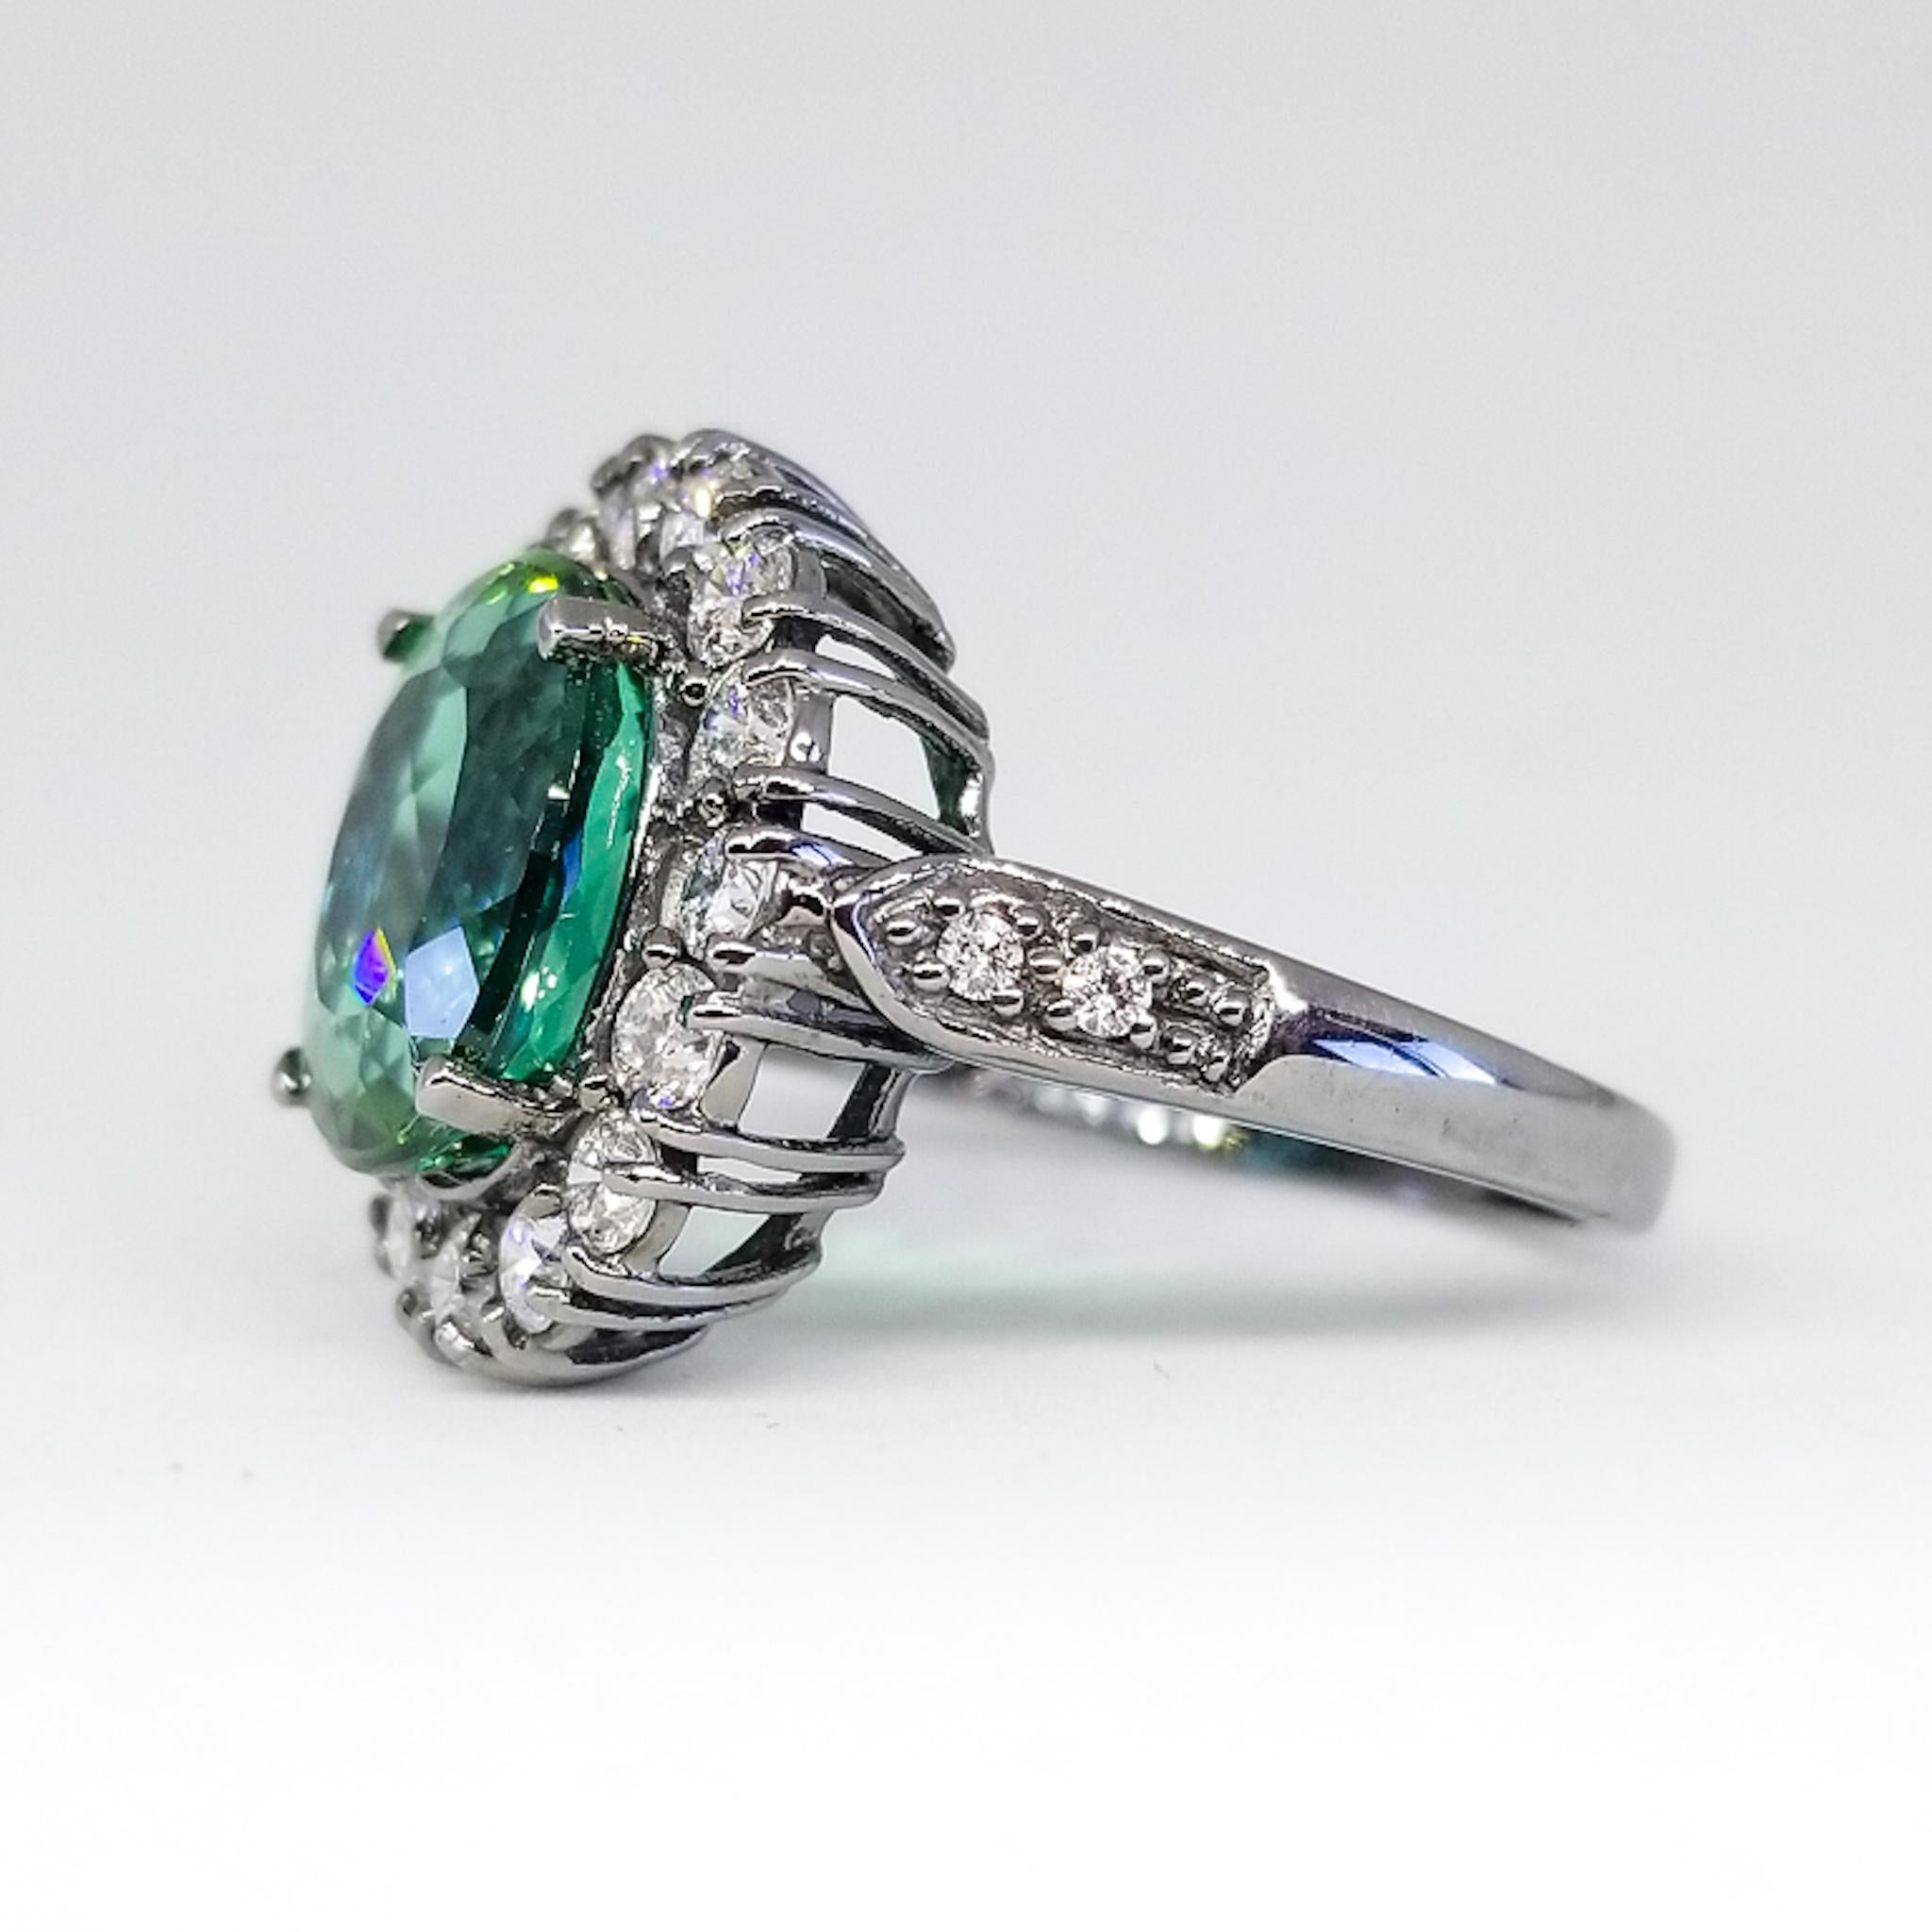 Oval Cut 5.14 Carat Natural Mint Green Tourmaline and 1.70 Carat Diamond Ring Black Gold For Sale